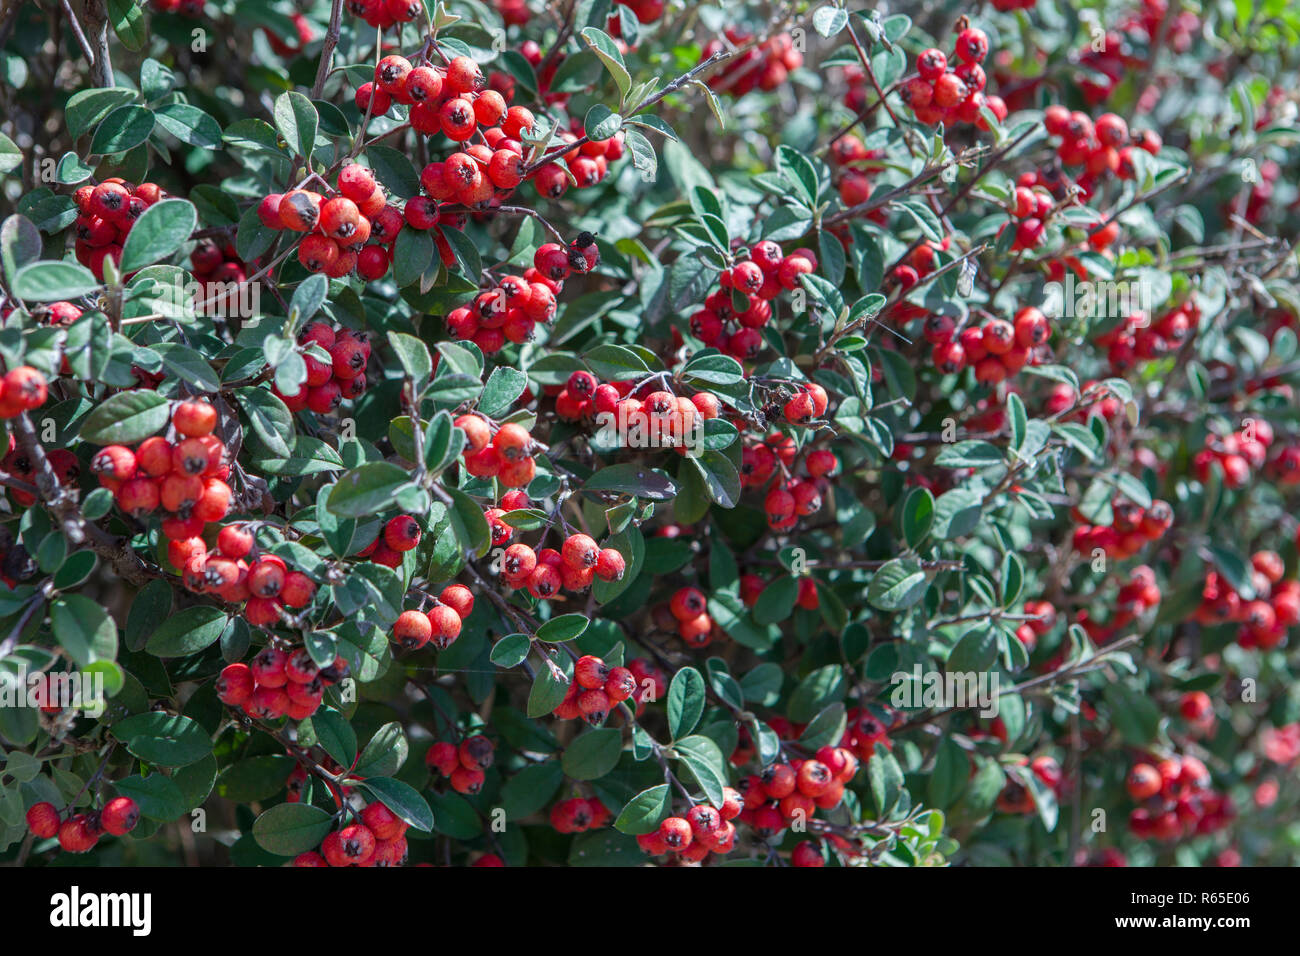 Cotoneaster red fruits in garden Stock Photo